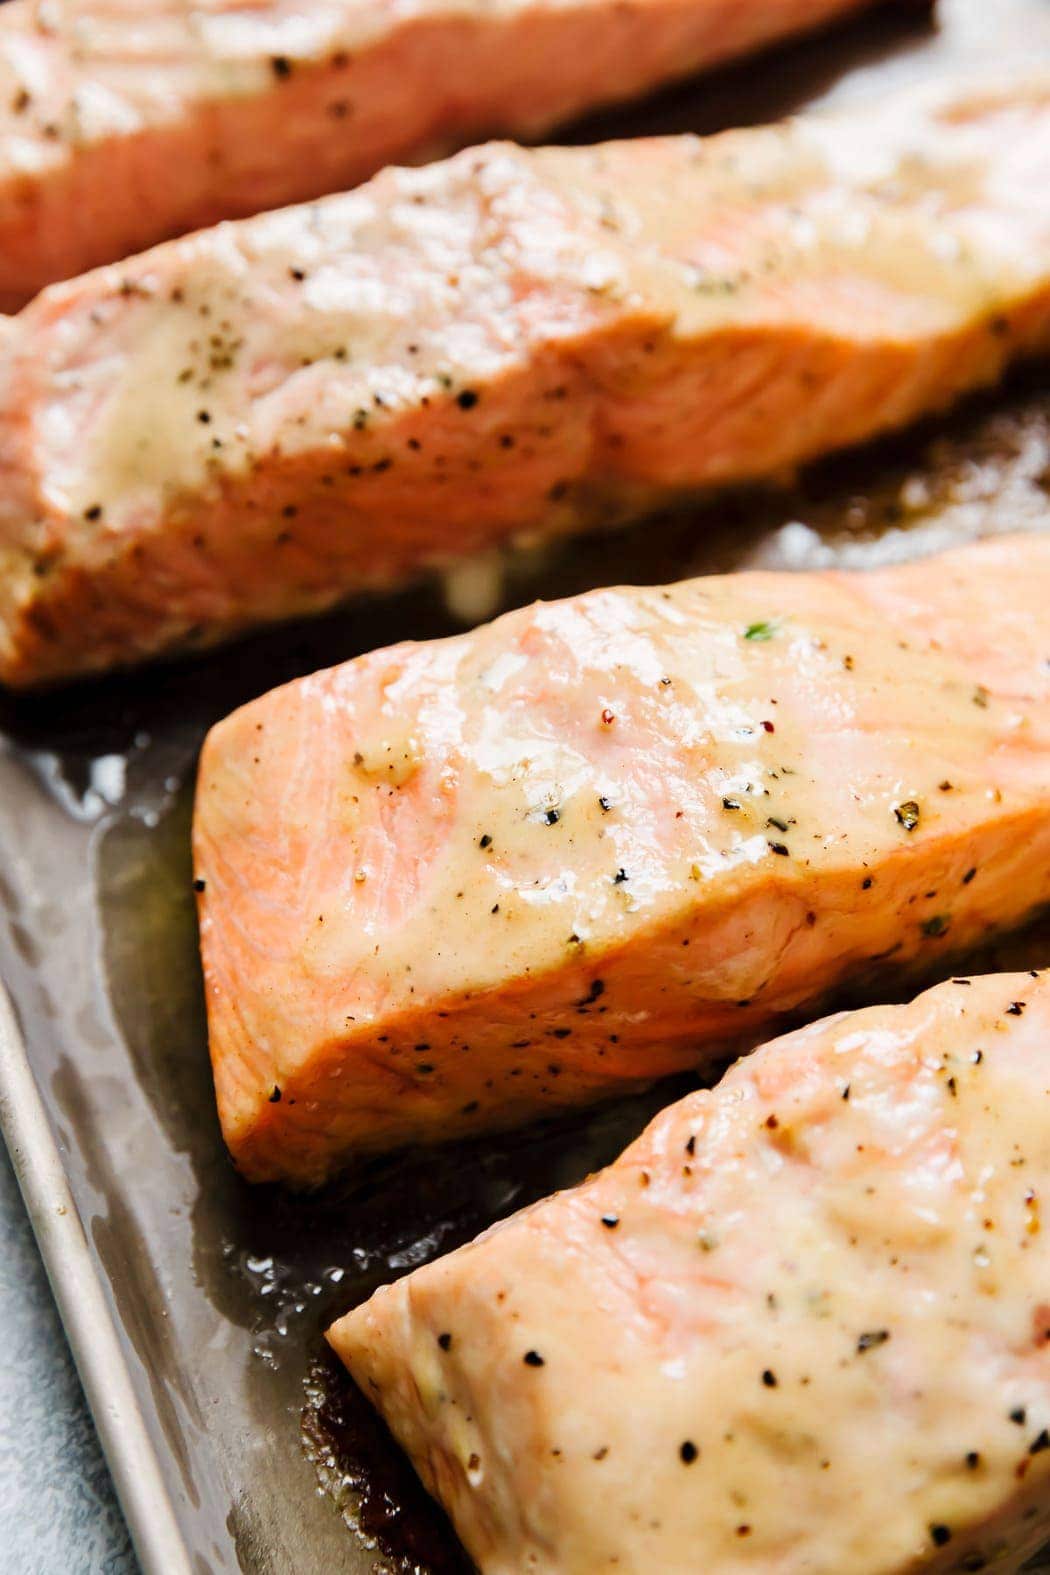 Perfectly baked salmon fillets with caesar dressing baked into the top